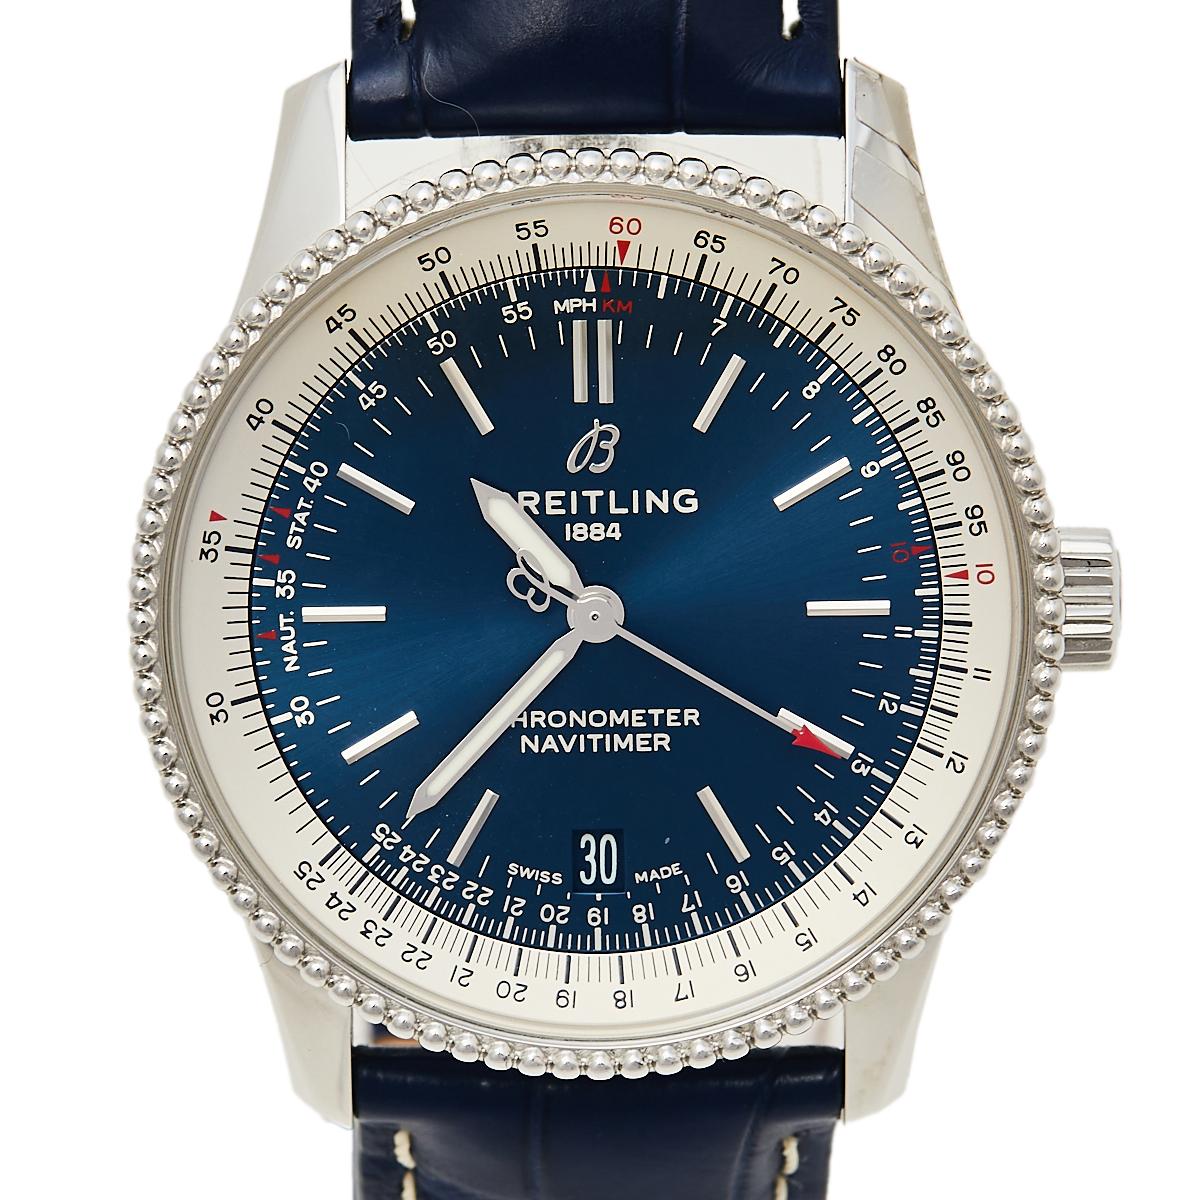 This watch is valuable not only for its appeal but also for the way it has been painstakingly designed and assembled. Swiss-made and exuding modern style, this timepiece by Breitling has been created with nothing lesser than excellence. It has a